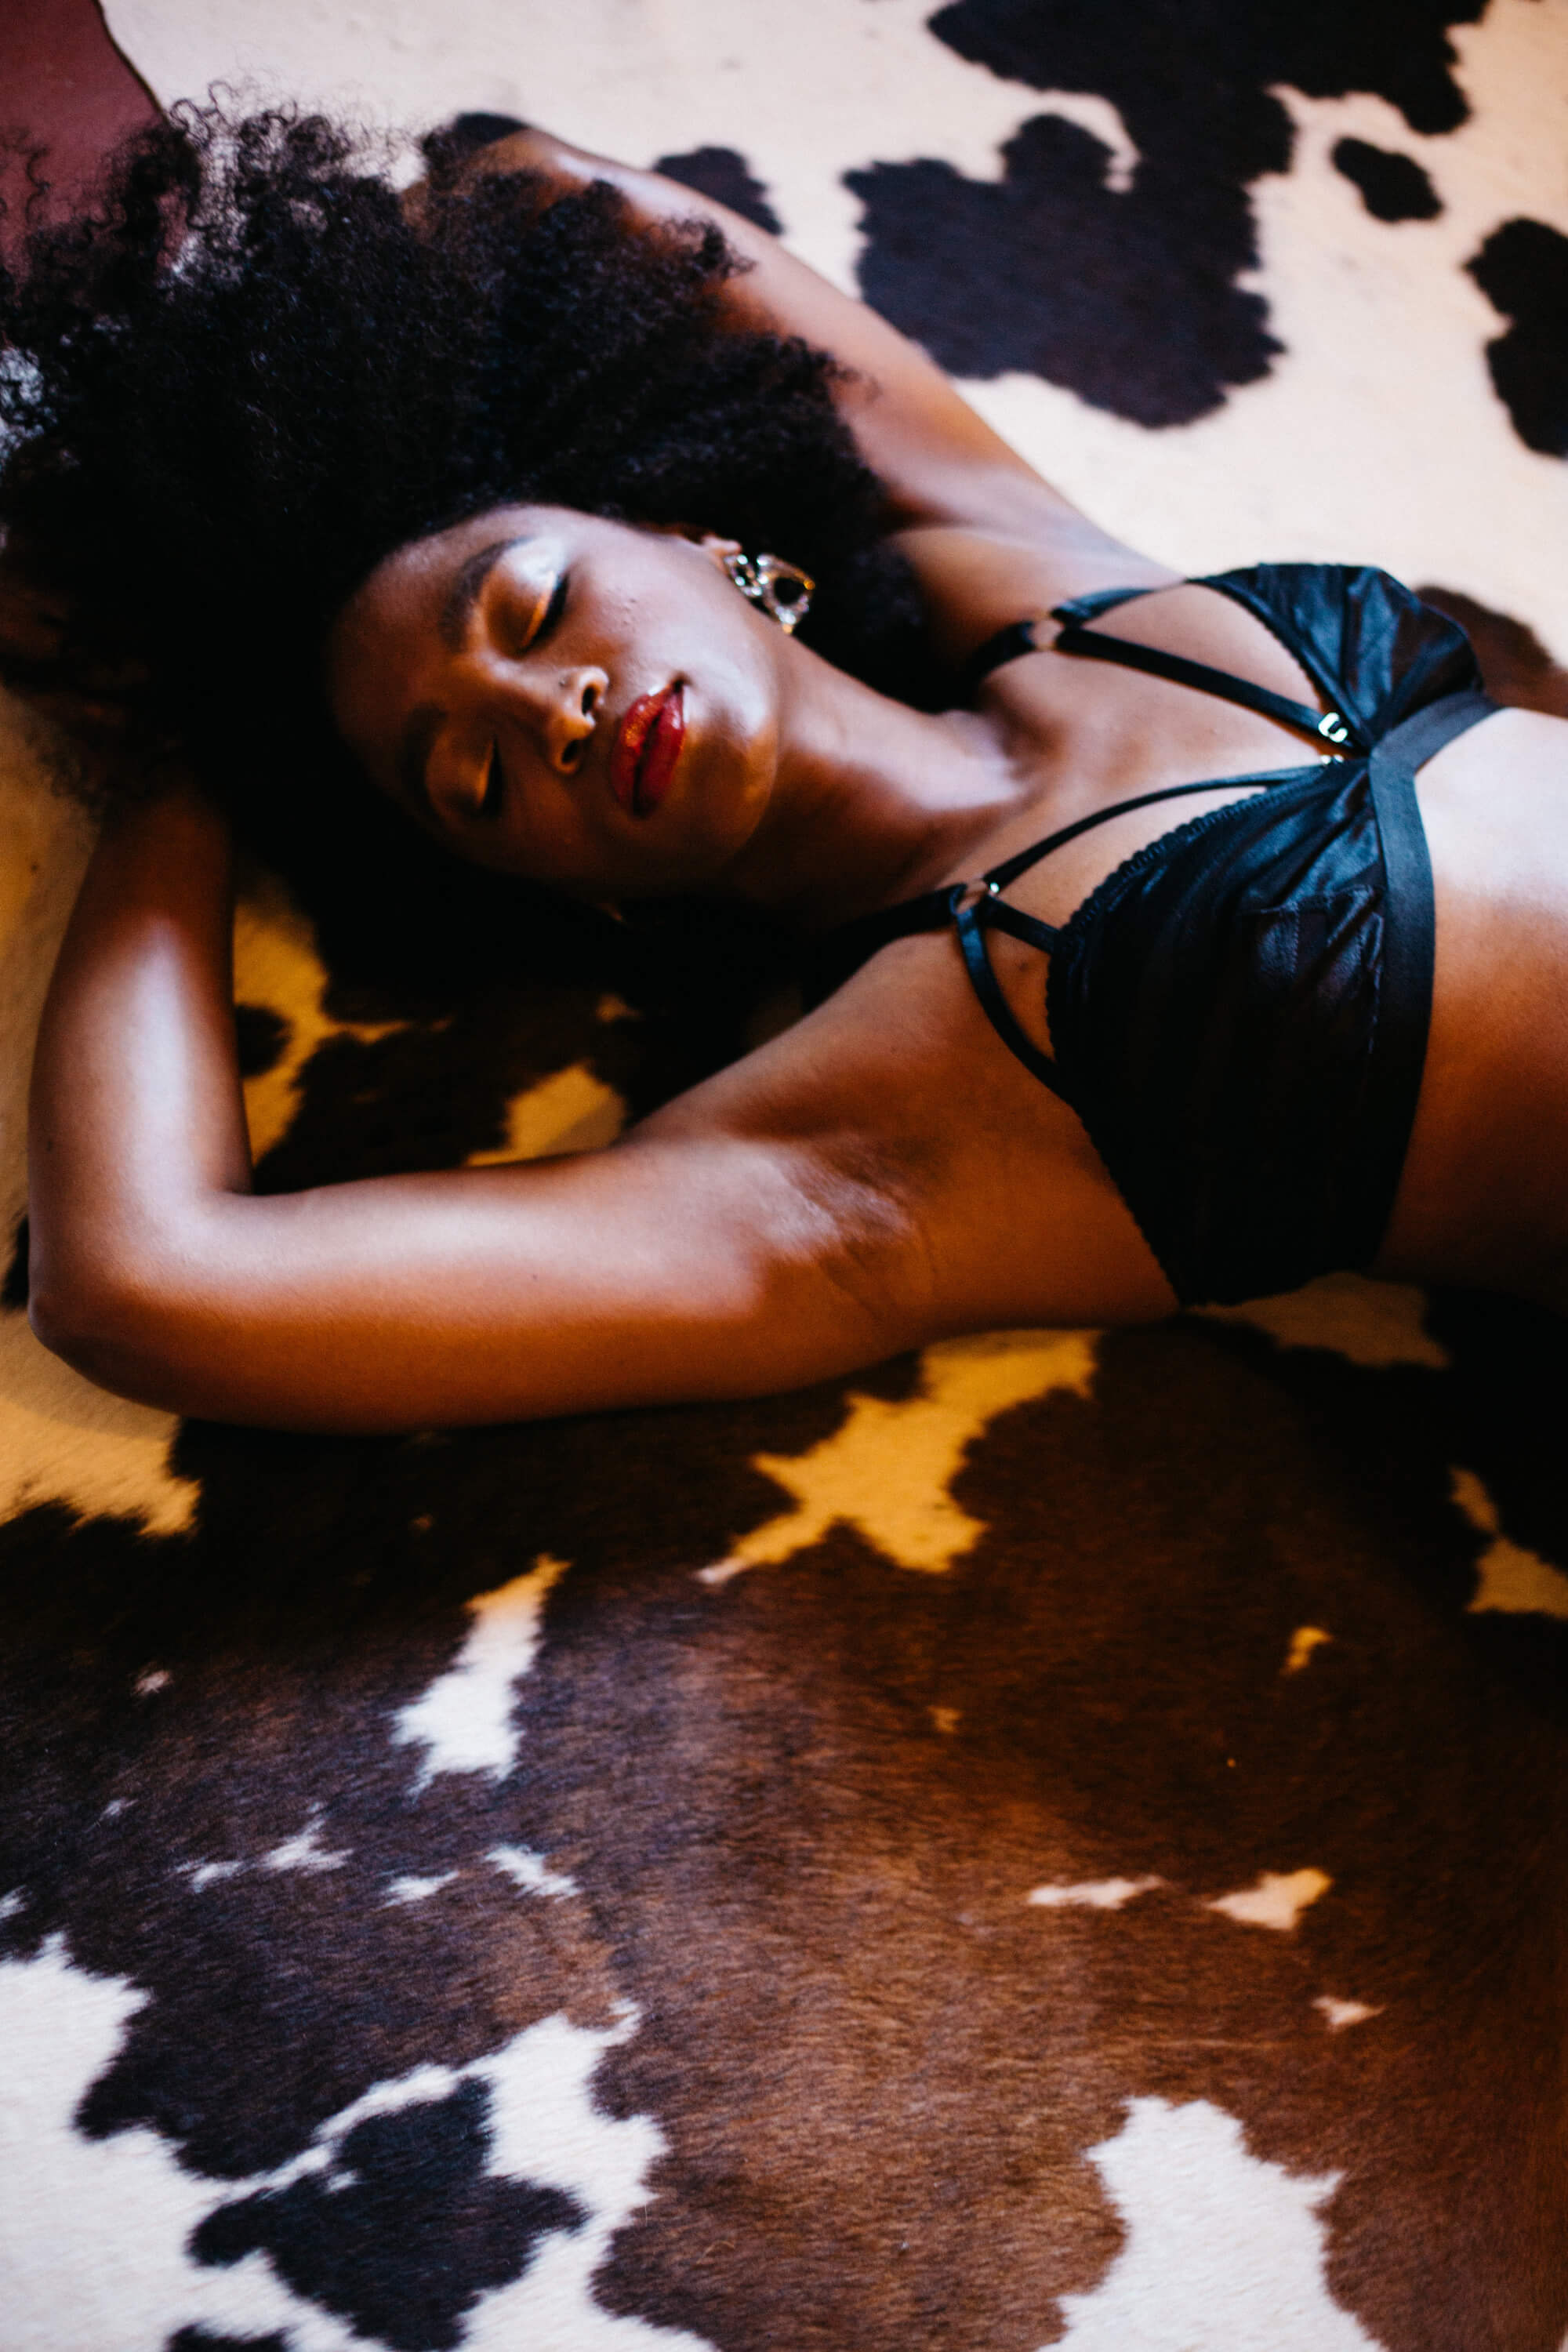 Lingerie Editorial. Michelle Terris Photography. Lonely Lingerie. The Lingerie Addict.